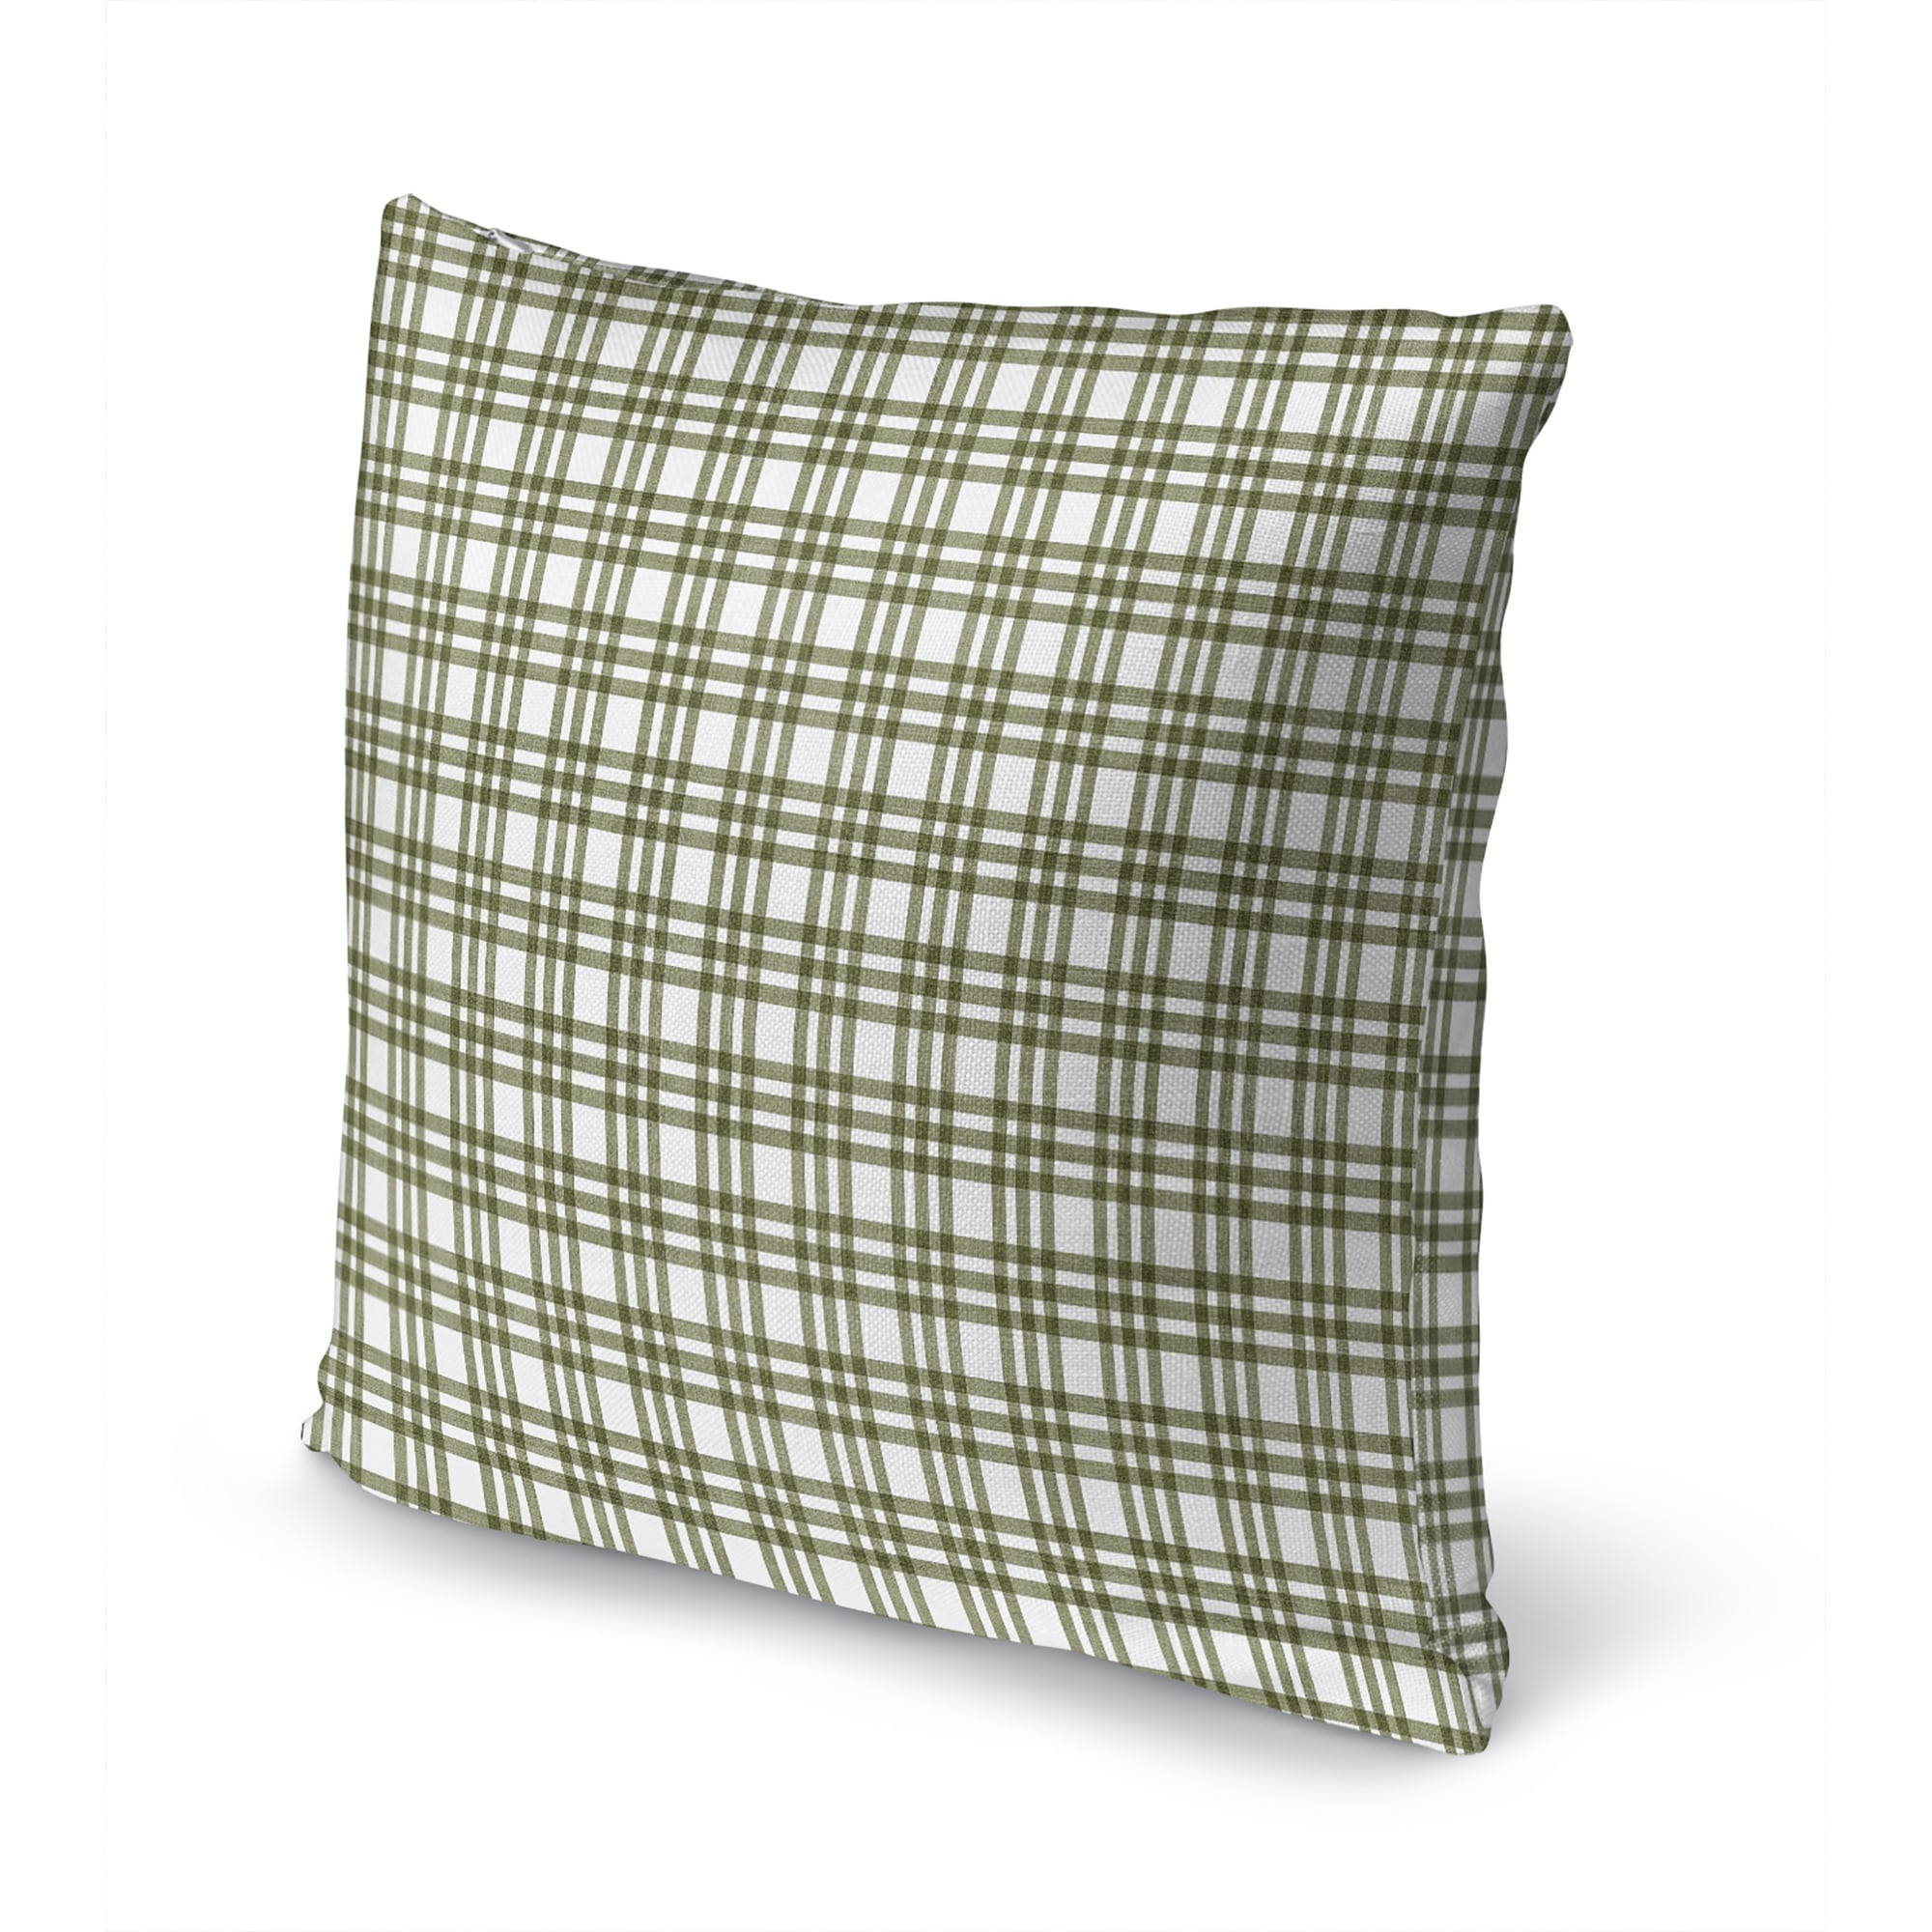 https://ak1.ostkcdn.com/images/products/is/images/direct/6d6bf85d3fd398b3380ea9de3011bfcf19e625b1/SMALL-GINGHAM-PLAID-GREEN-Accent-Pillow-by-Becky-Bailey.jpg